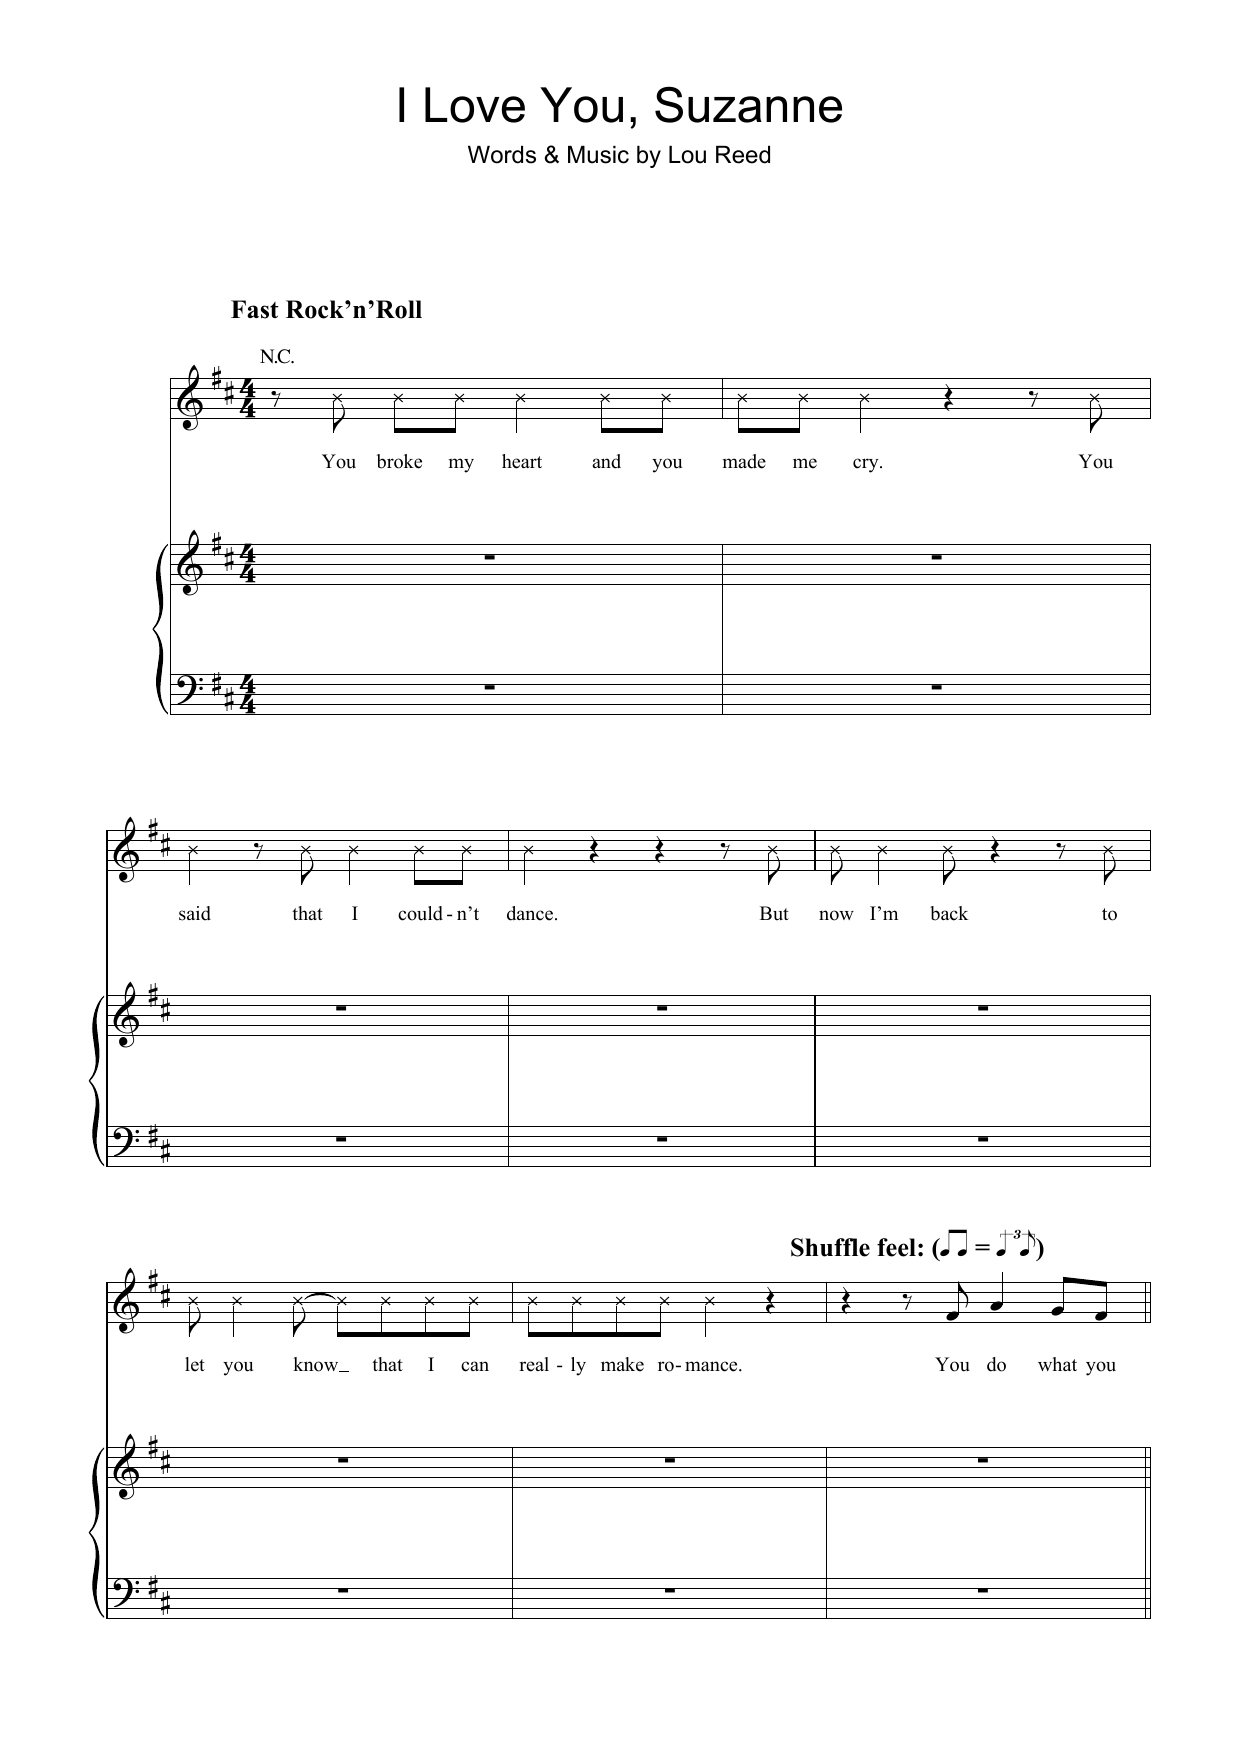 Download Lou Reed I Love You, Suzanne Sheet Music